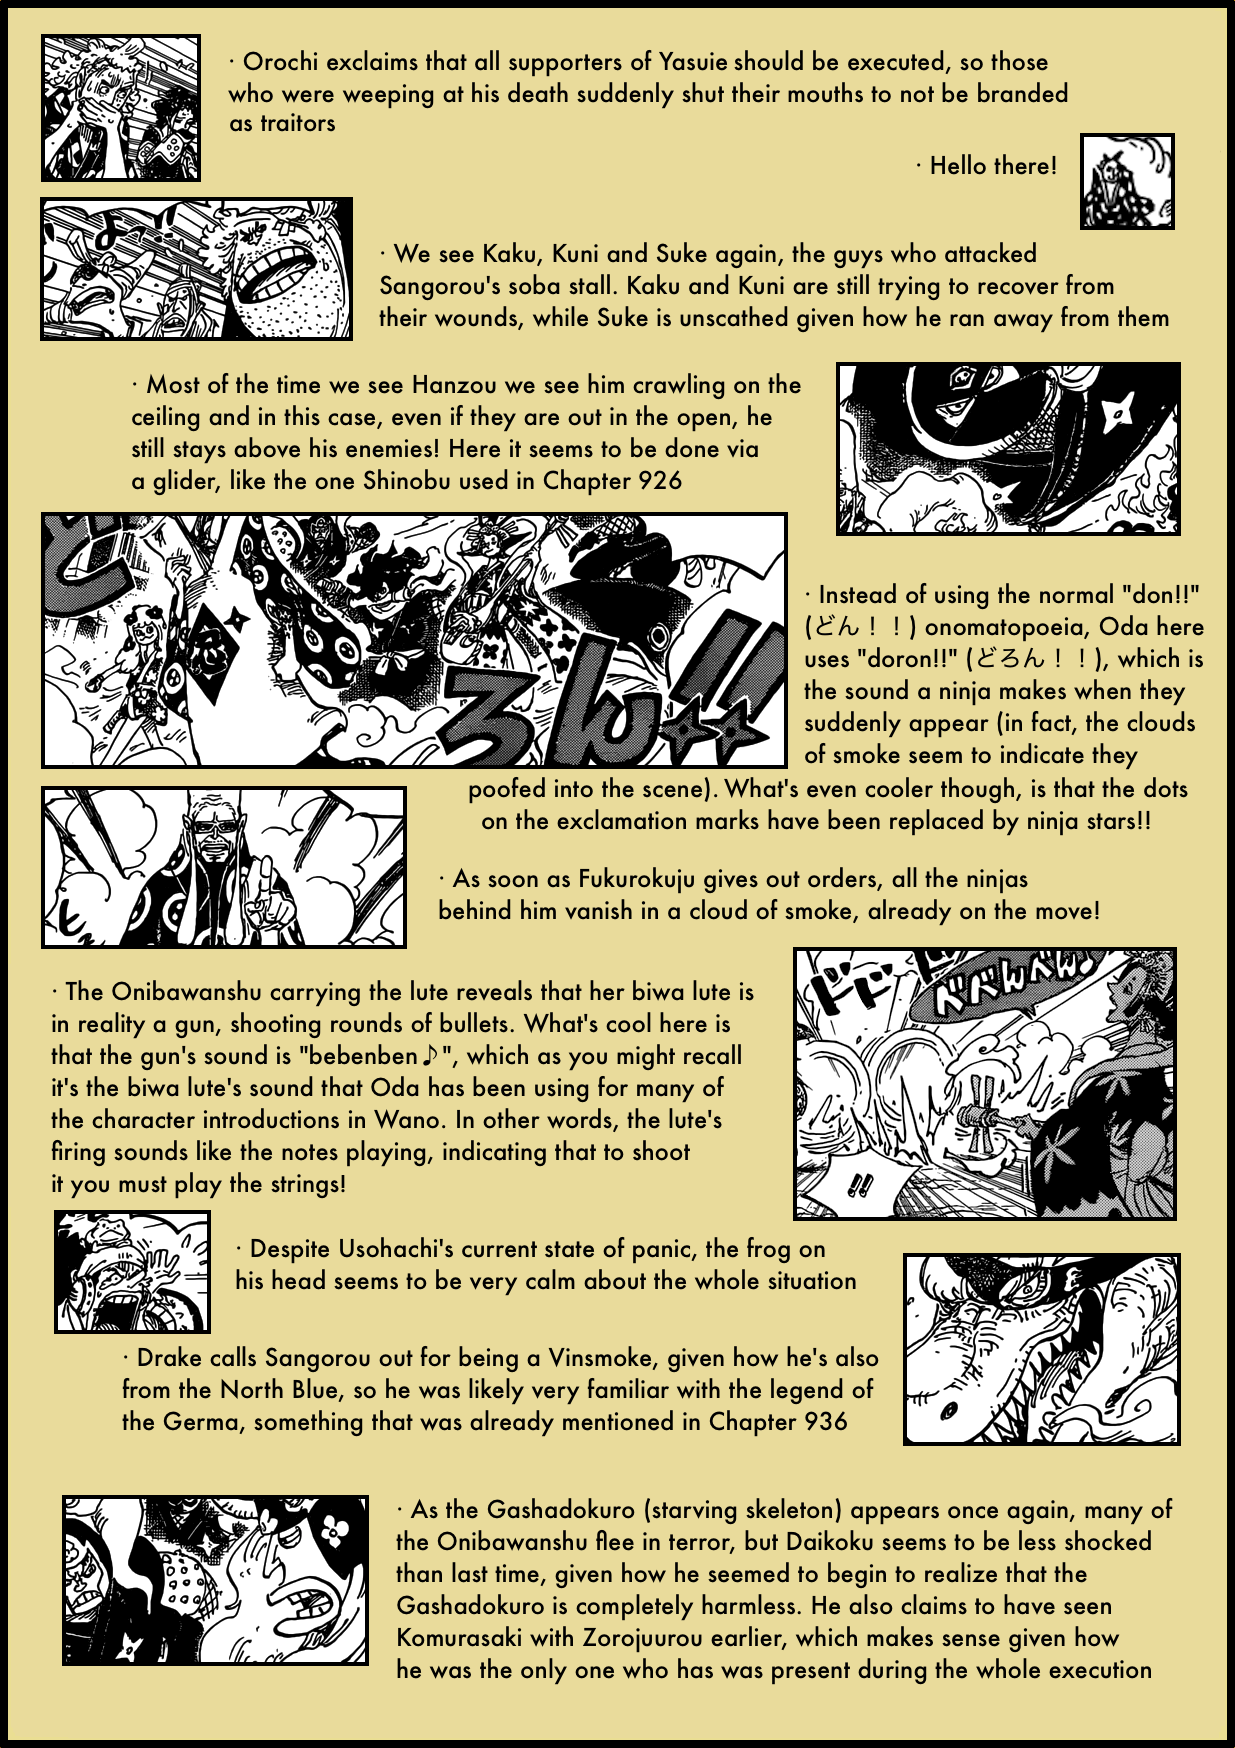 Chapter Secrets Chapter 945 In Depth Analysis The Library Of Ohara